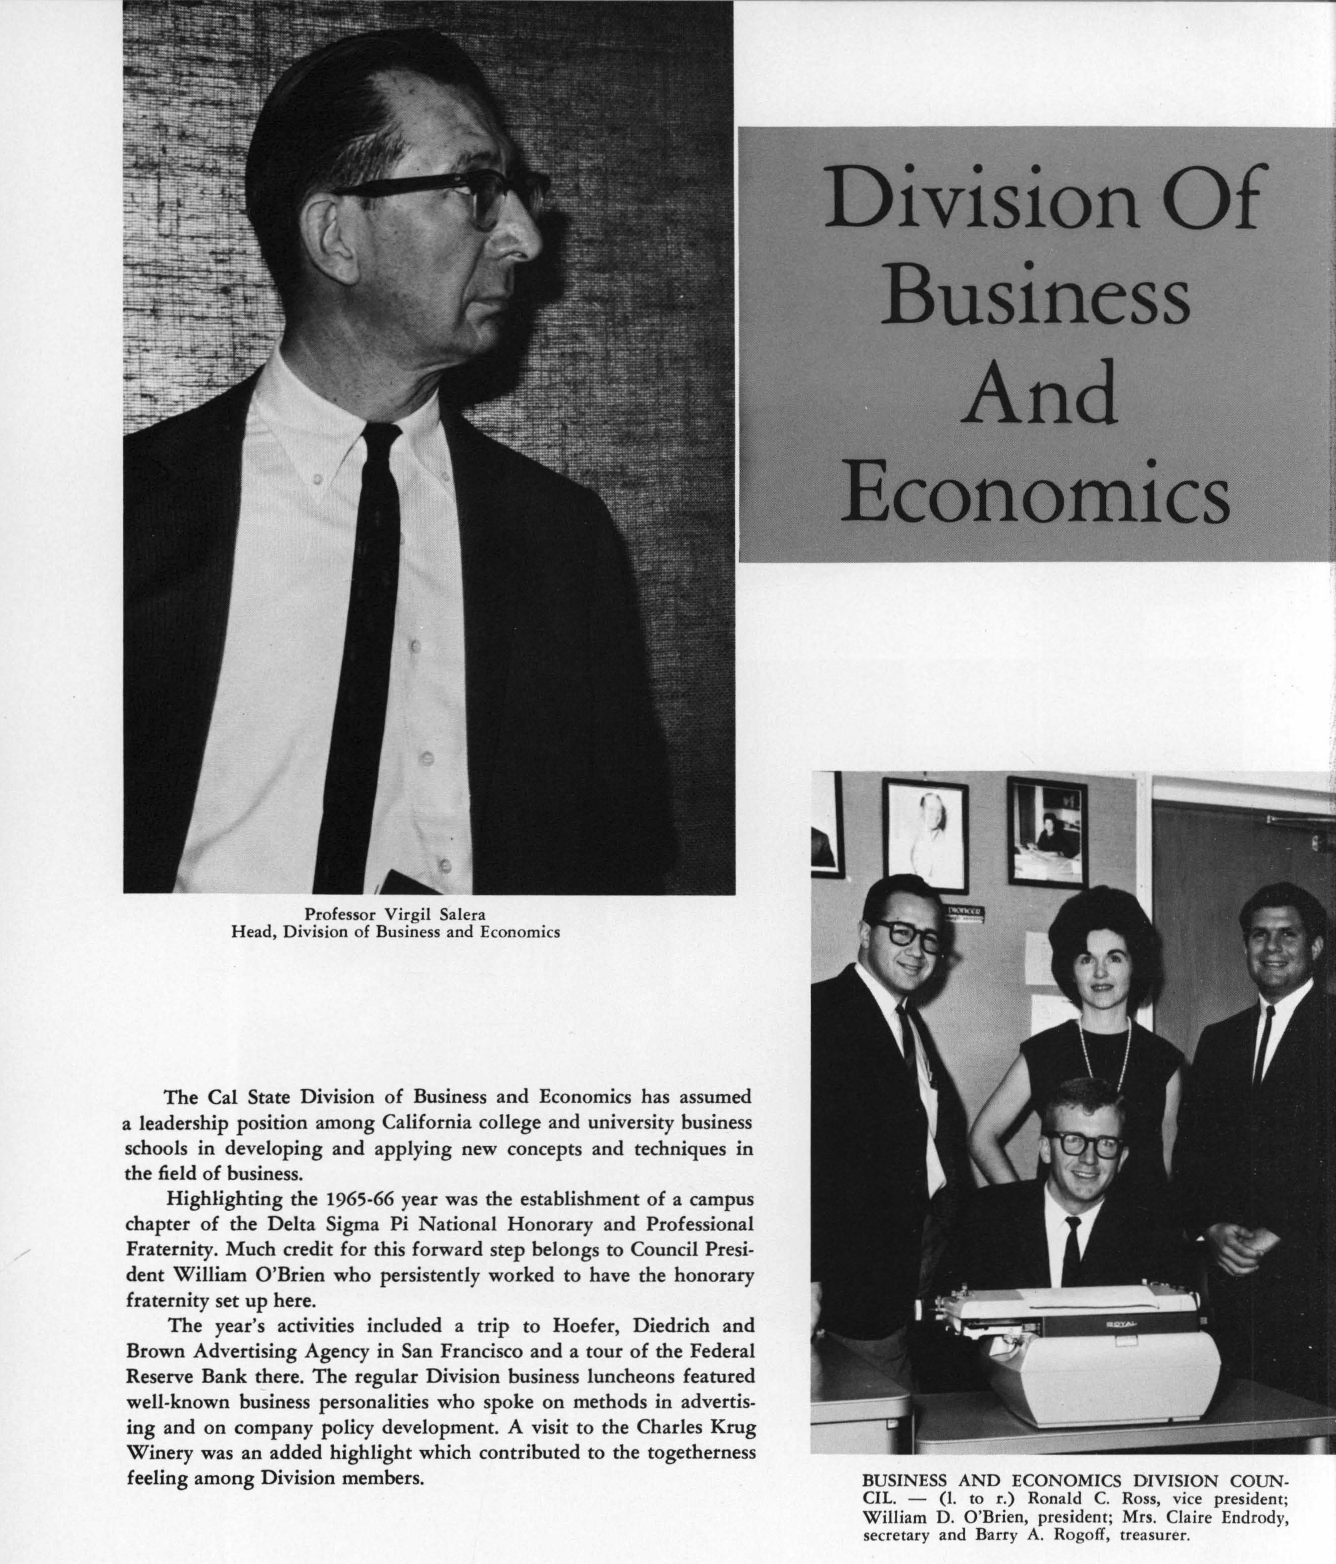 Division of Business & Economics from 1966